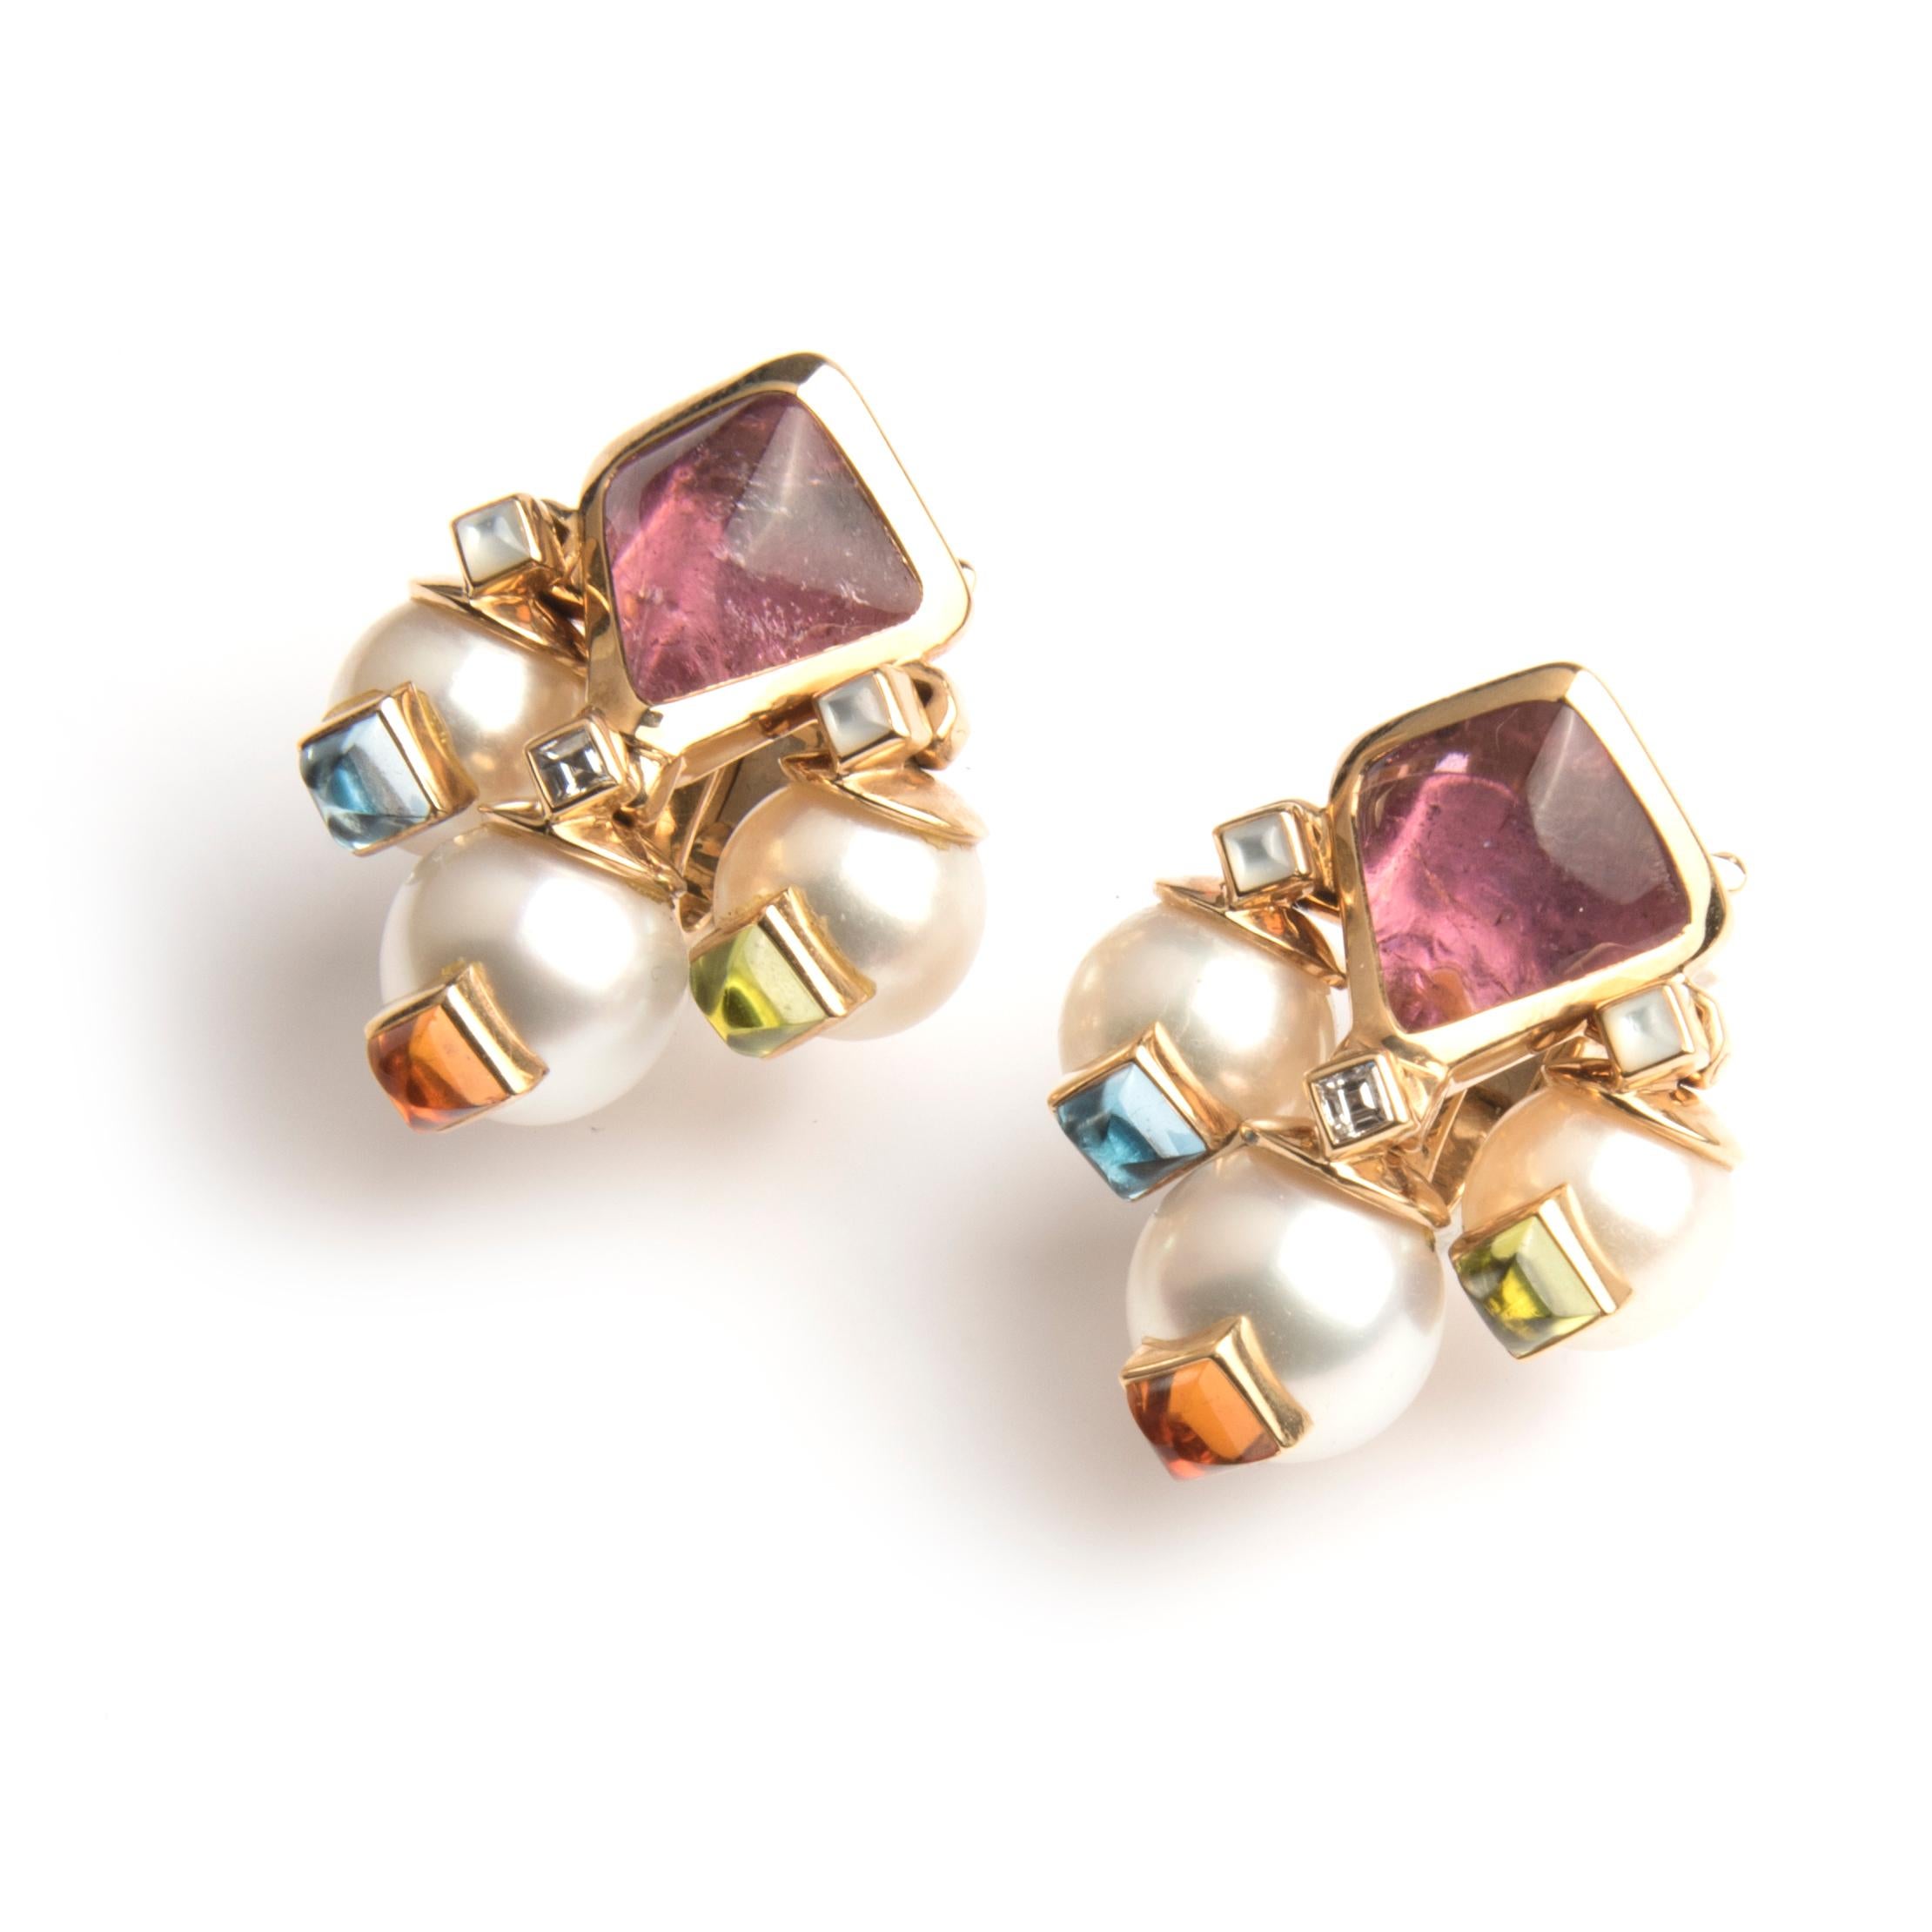 Marina B 'Aquila' clip earrings,  18k yellow gol¬¬d, each with a pink tourmaline, a diamond and tree suspended cultured pearls set with Russian quartz.
Signed Marina B,  makers mark, Italian hallmarks, numbered C3105 and C3130
Circa 1995
